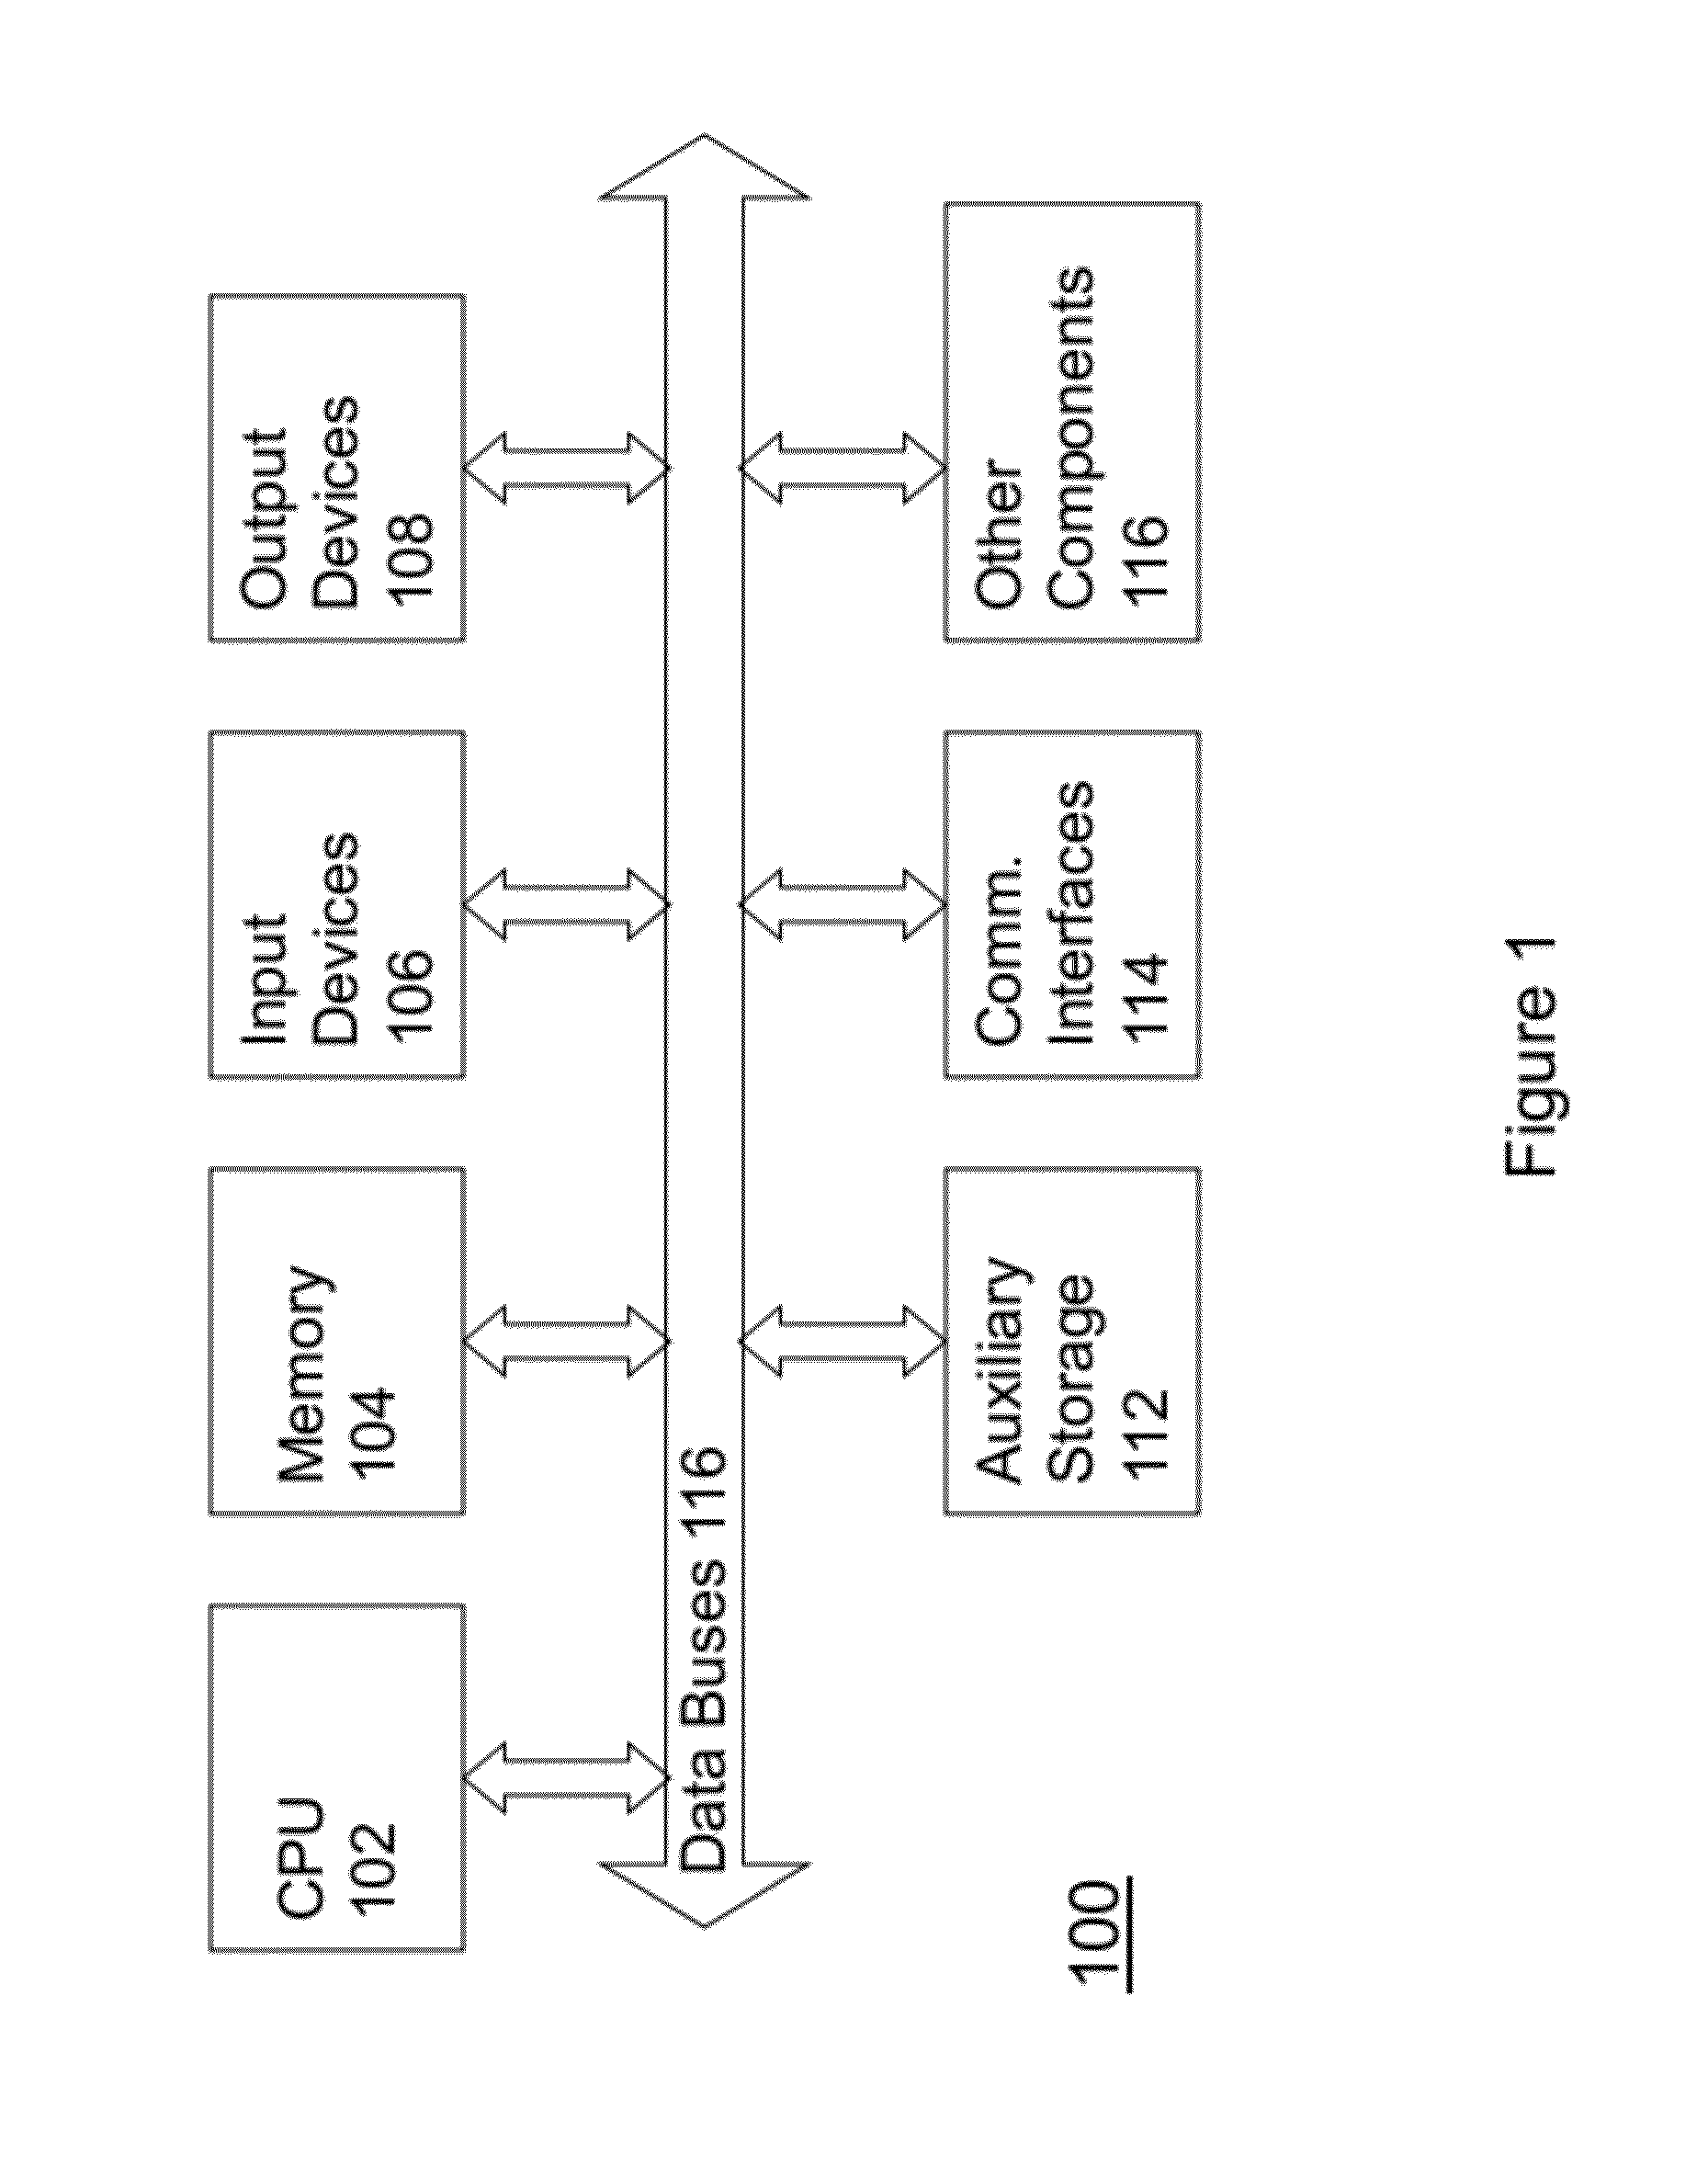 System and Method for a Chip Generator